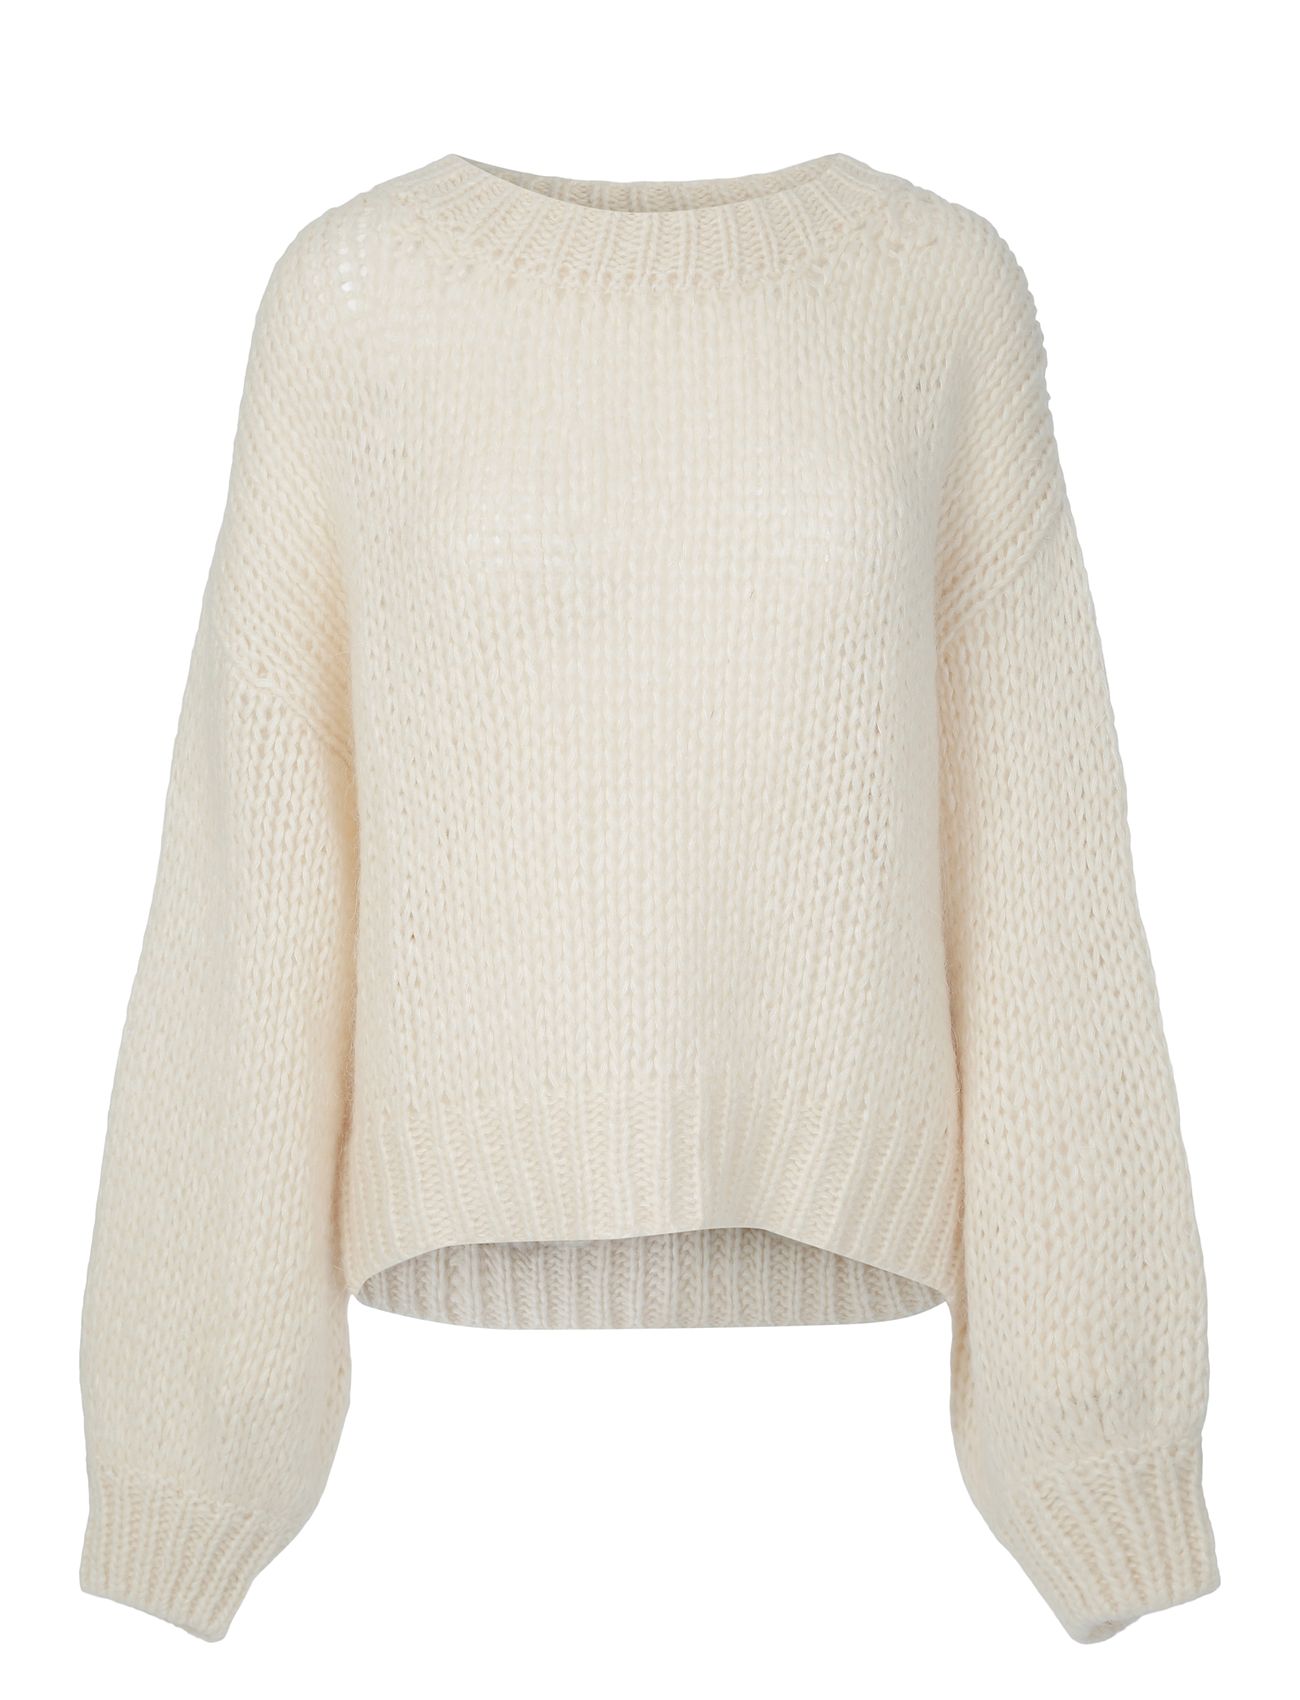 Florie Rn Sweater Tops Knitwear Jumpers Cream Once Untold